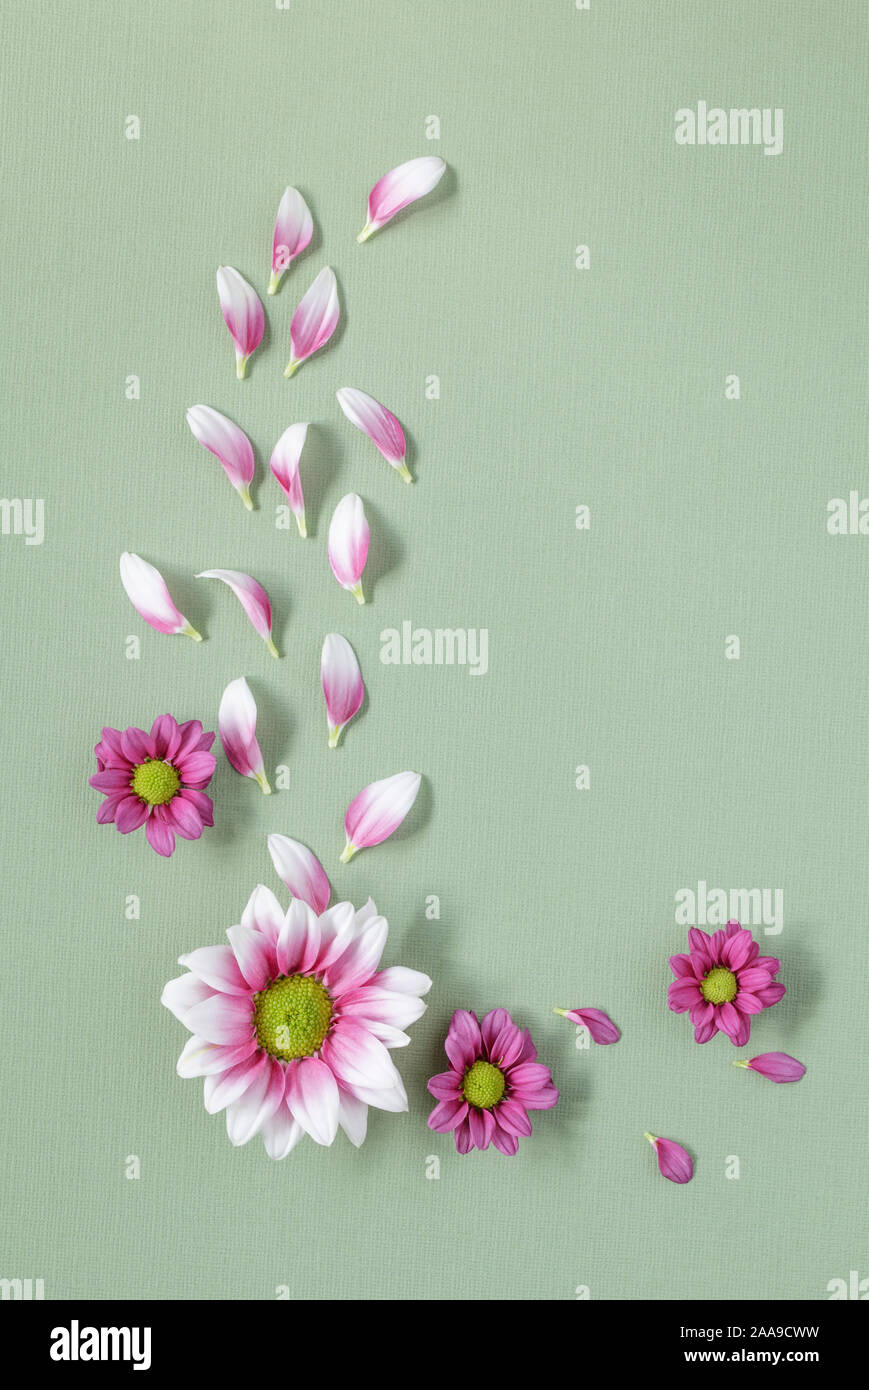 Chrysanthemums on green textured background with copyspace Stock Photo